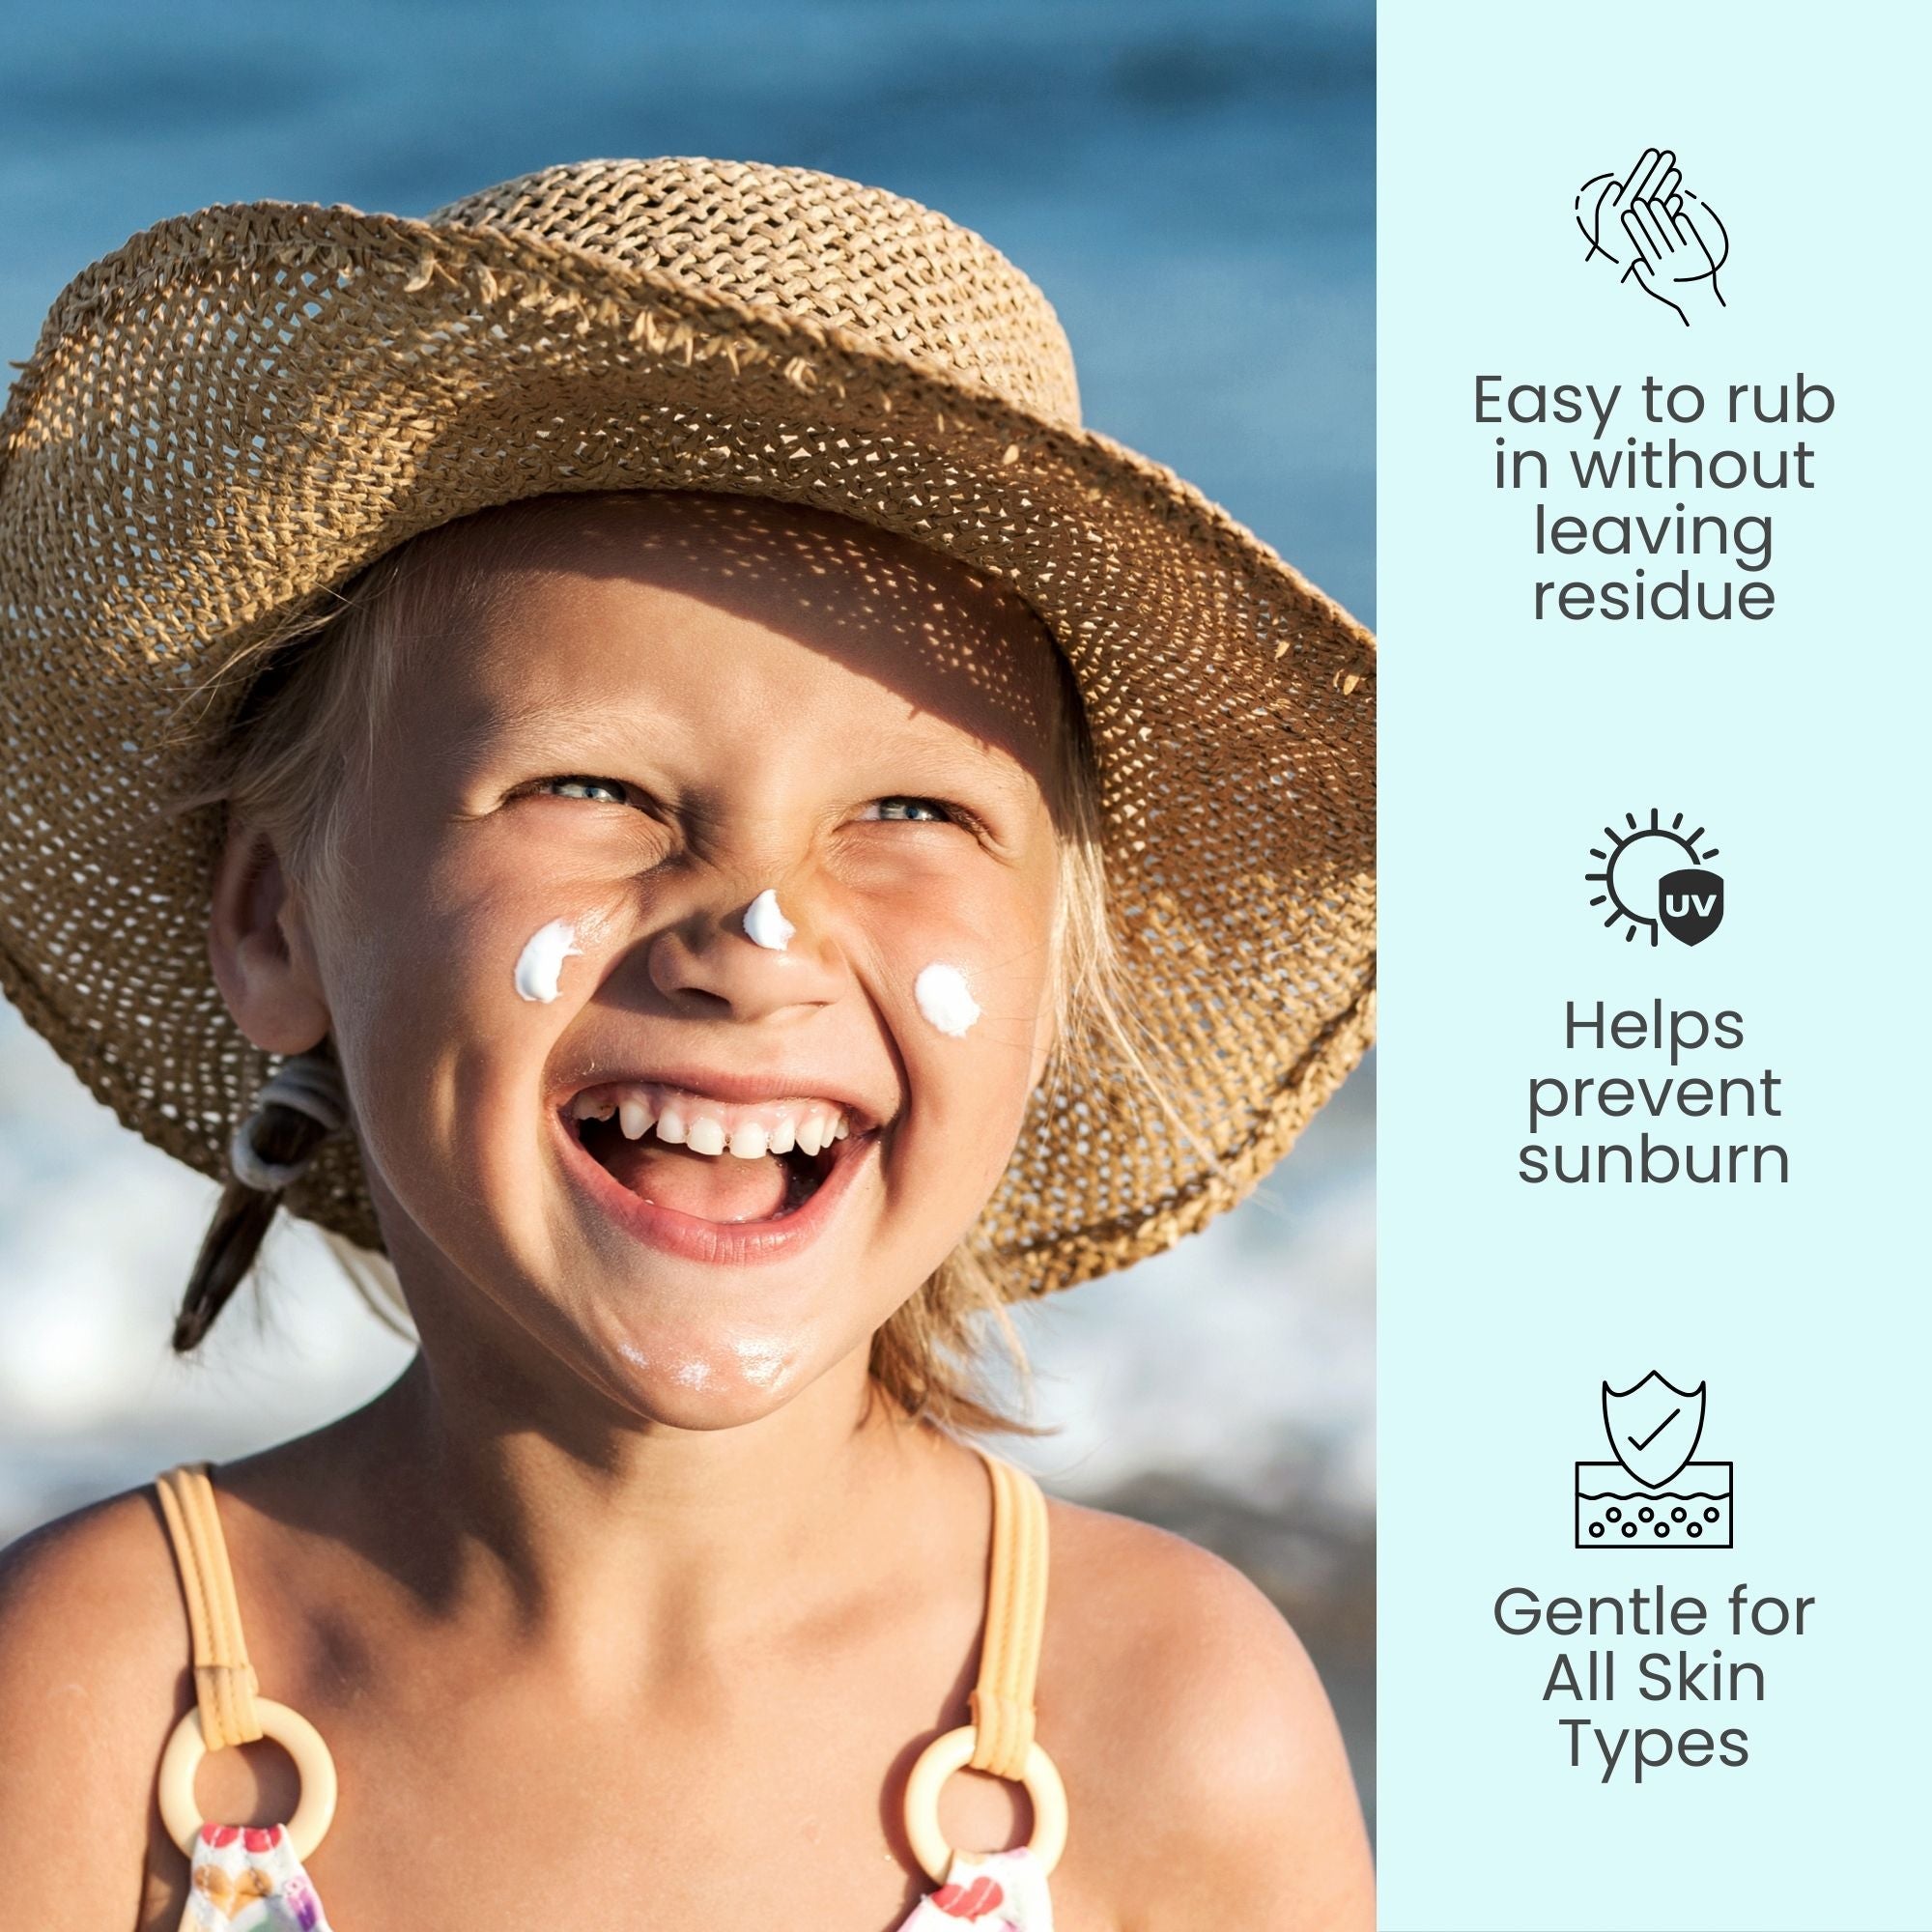 TruKid Easy On SPF 50 Sunscreen Features